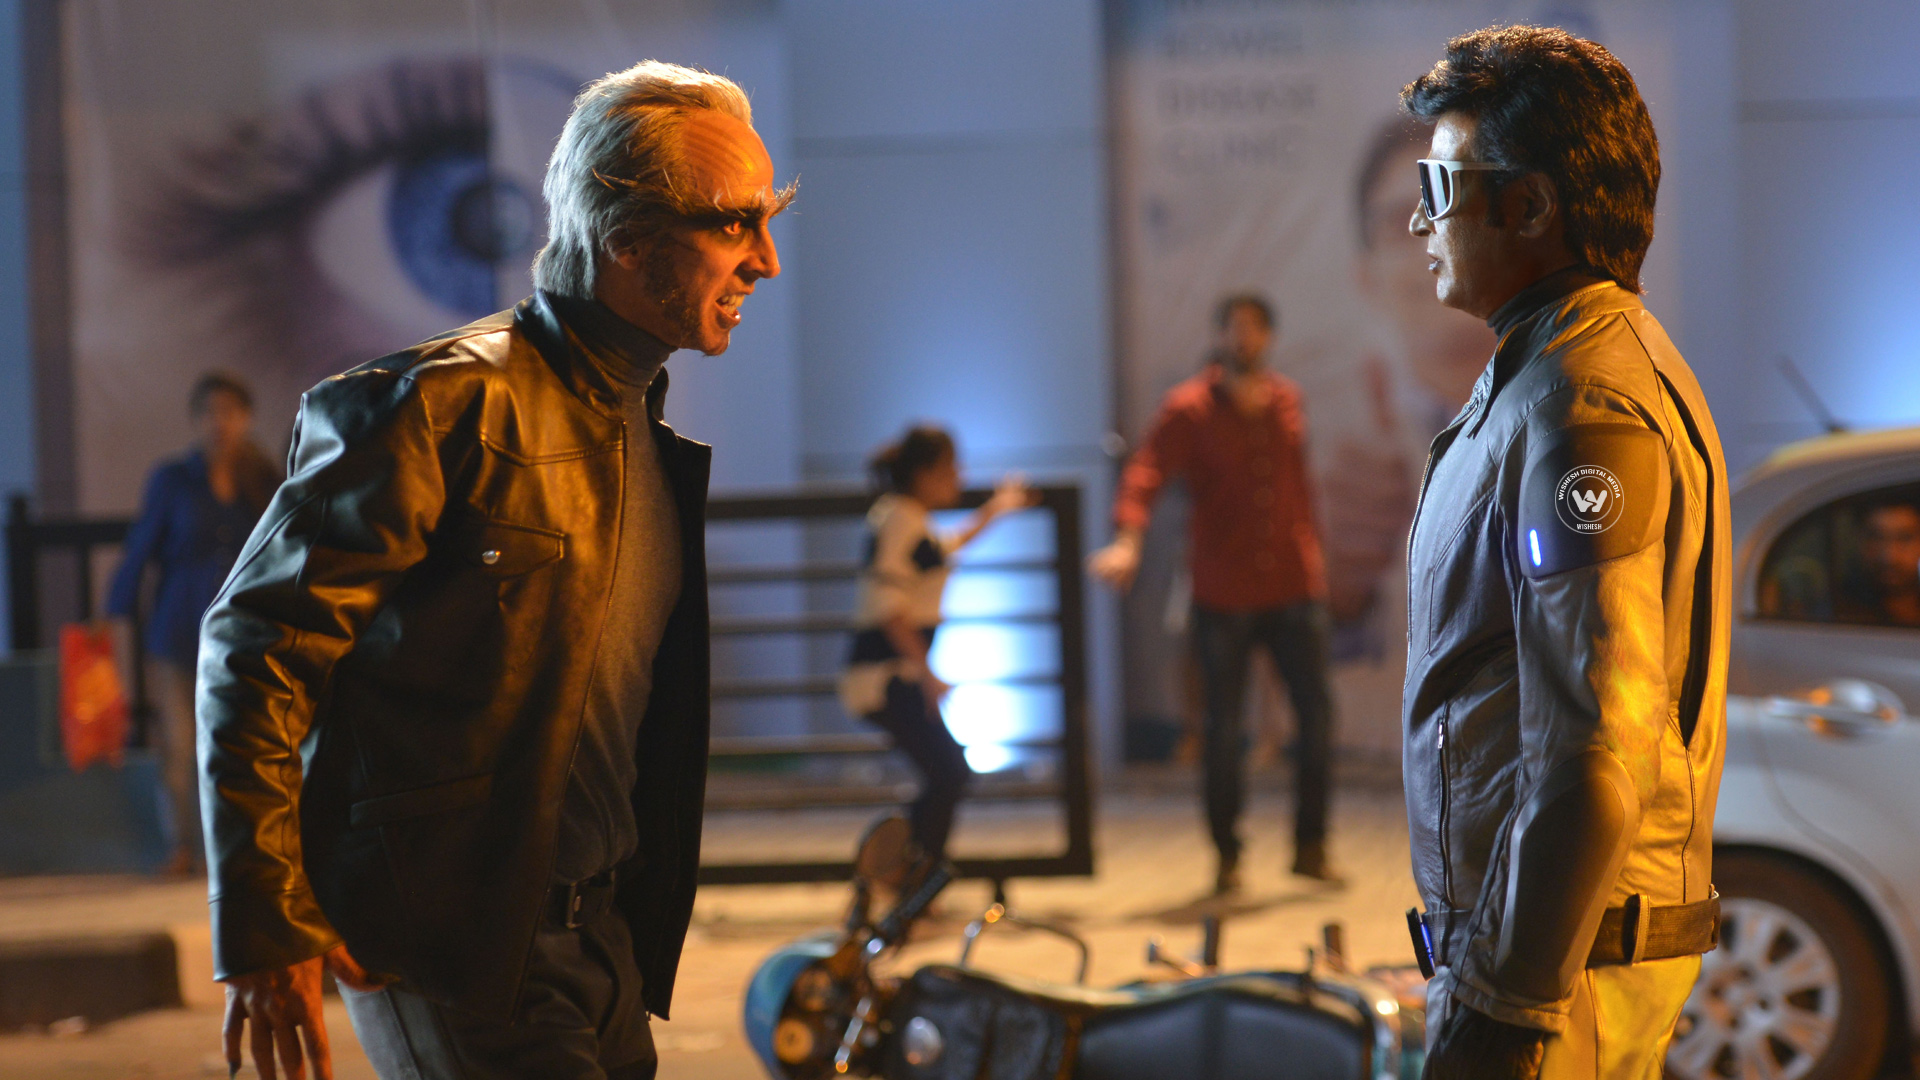 Wallpaper 8of 8 | 2.0 Movie movie Wallpapers | robo 2 HD Wallpapers | 2point0-wallpapers-08